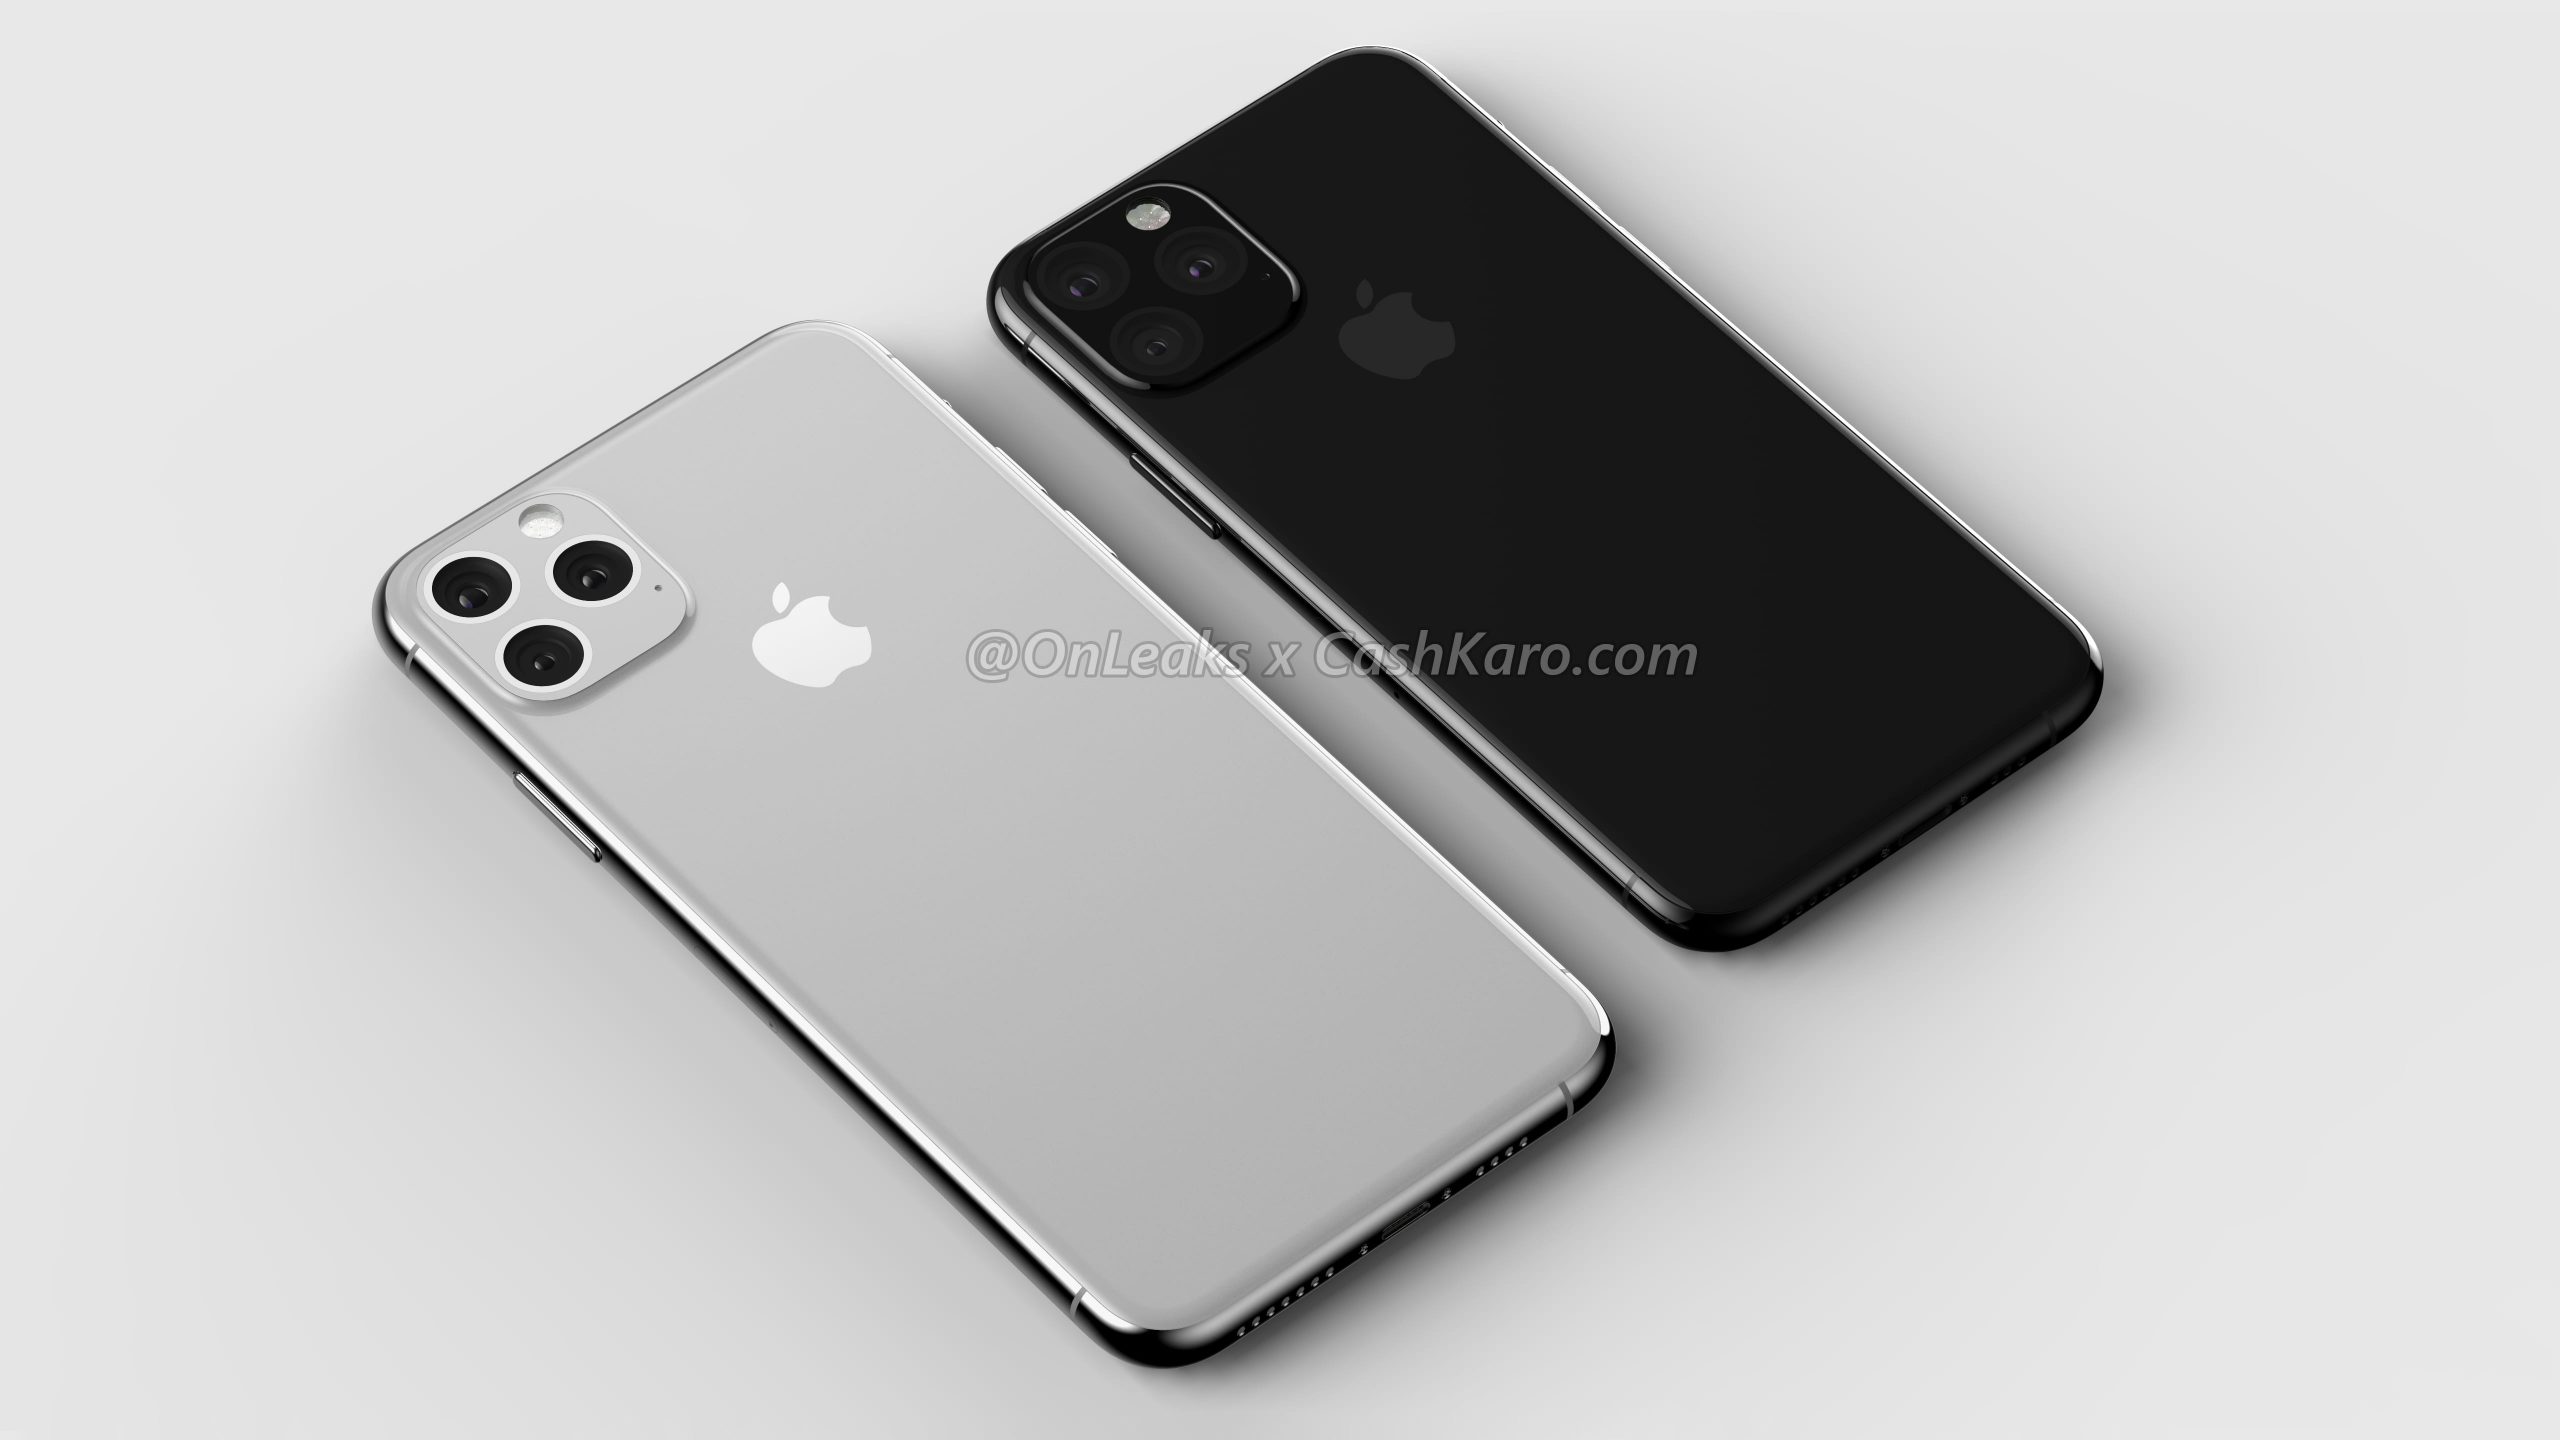 2019 iPhones could win a mode similar to Google Pixel's Night Sight